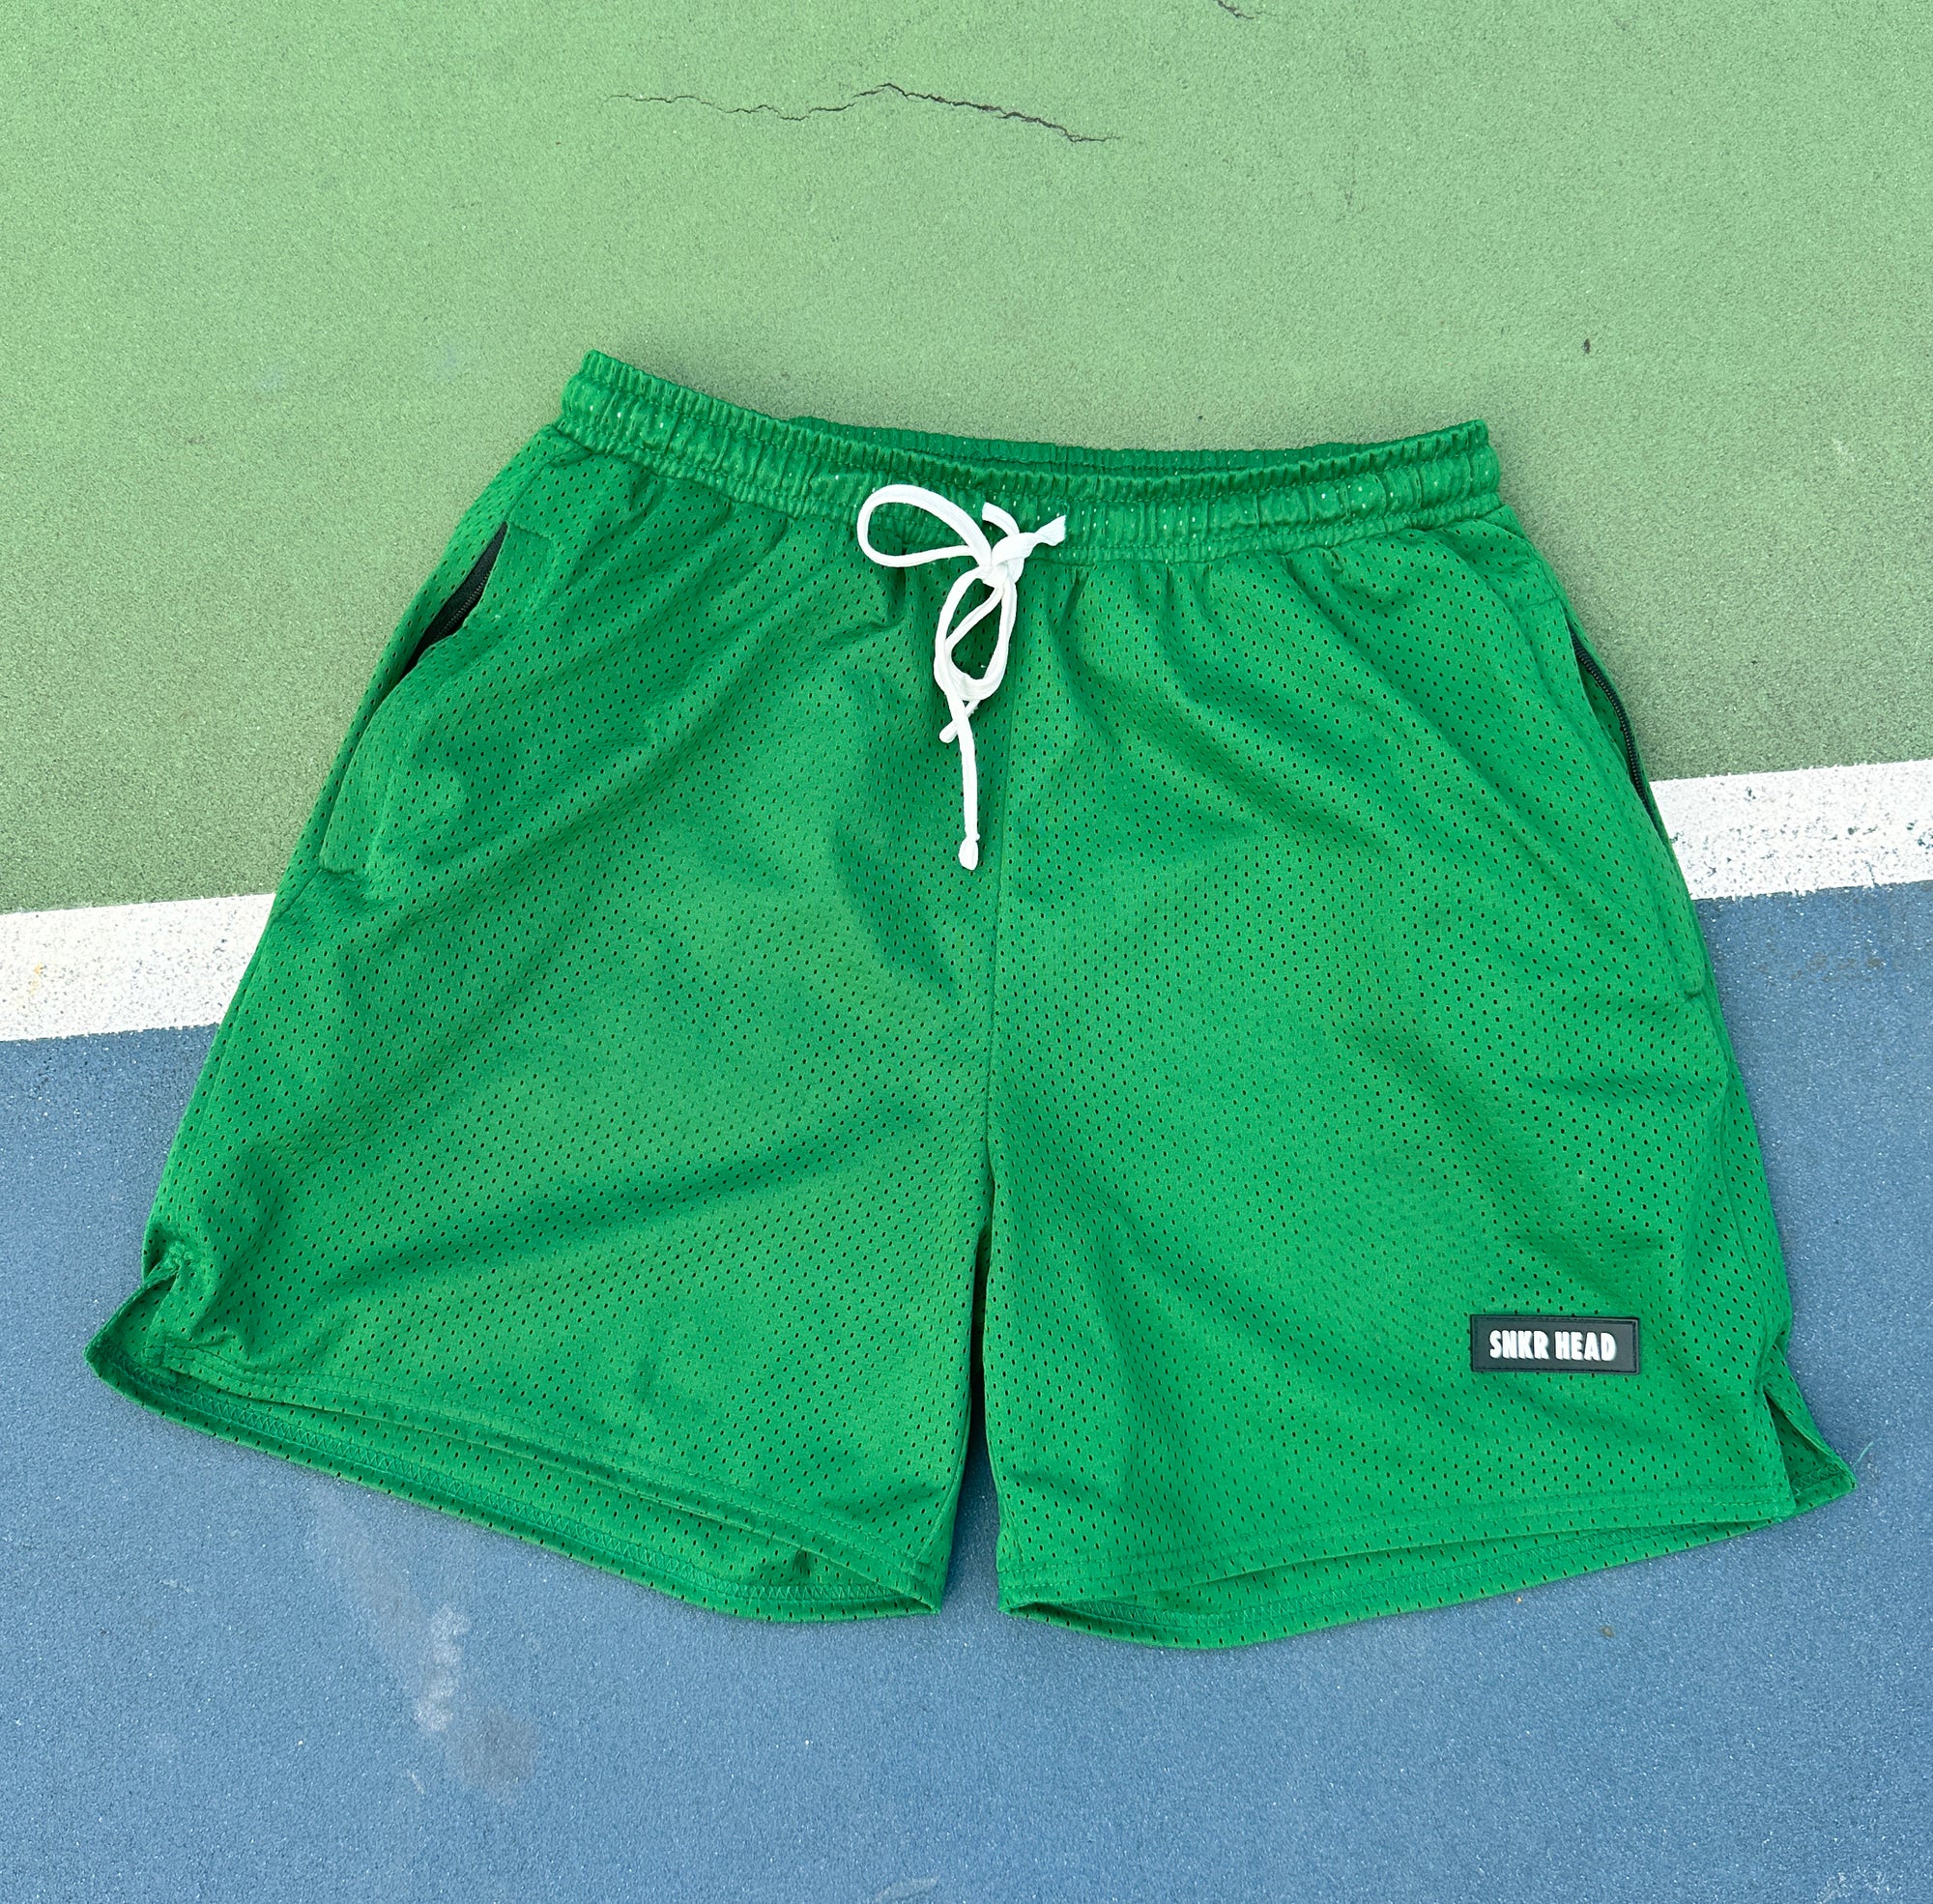 Cut & Sew Everyday SNKR HEAD Green Rubber Patch Shorts